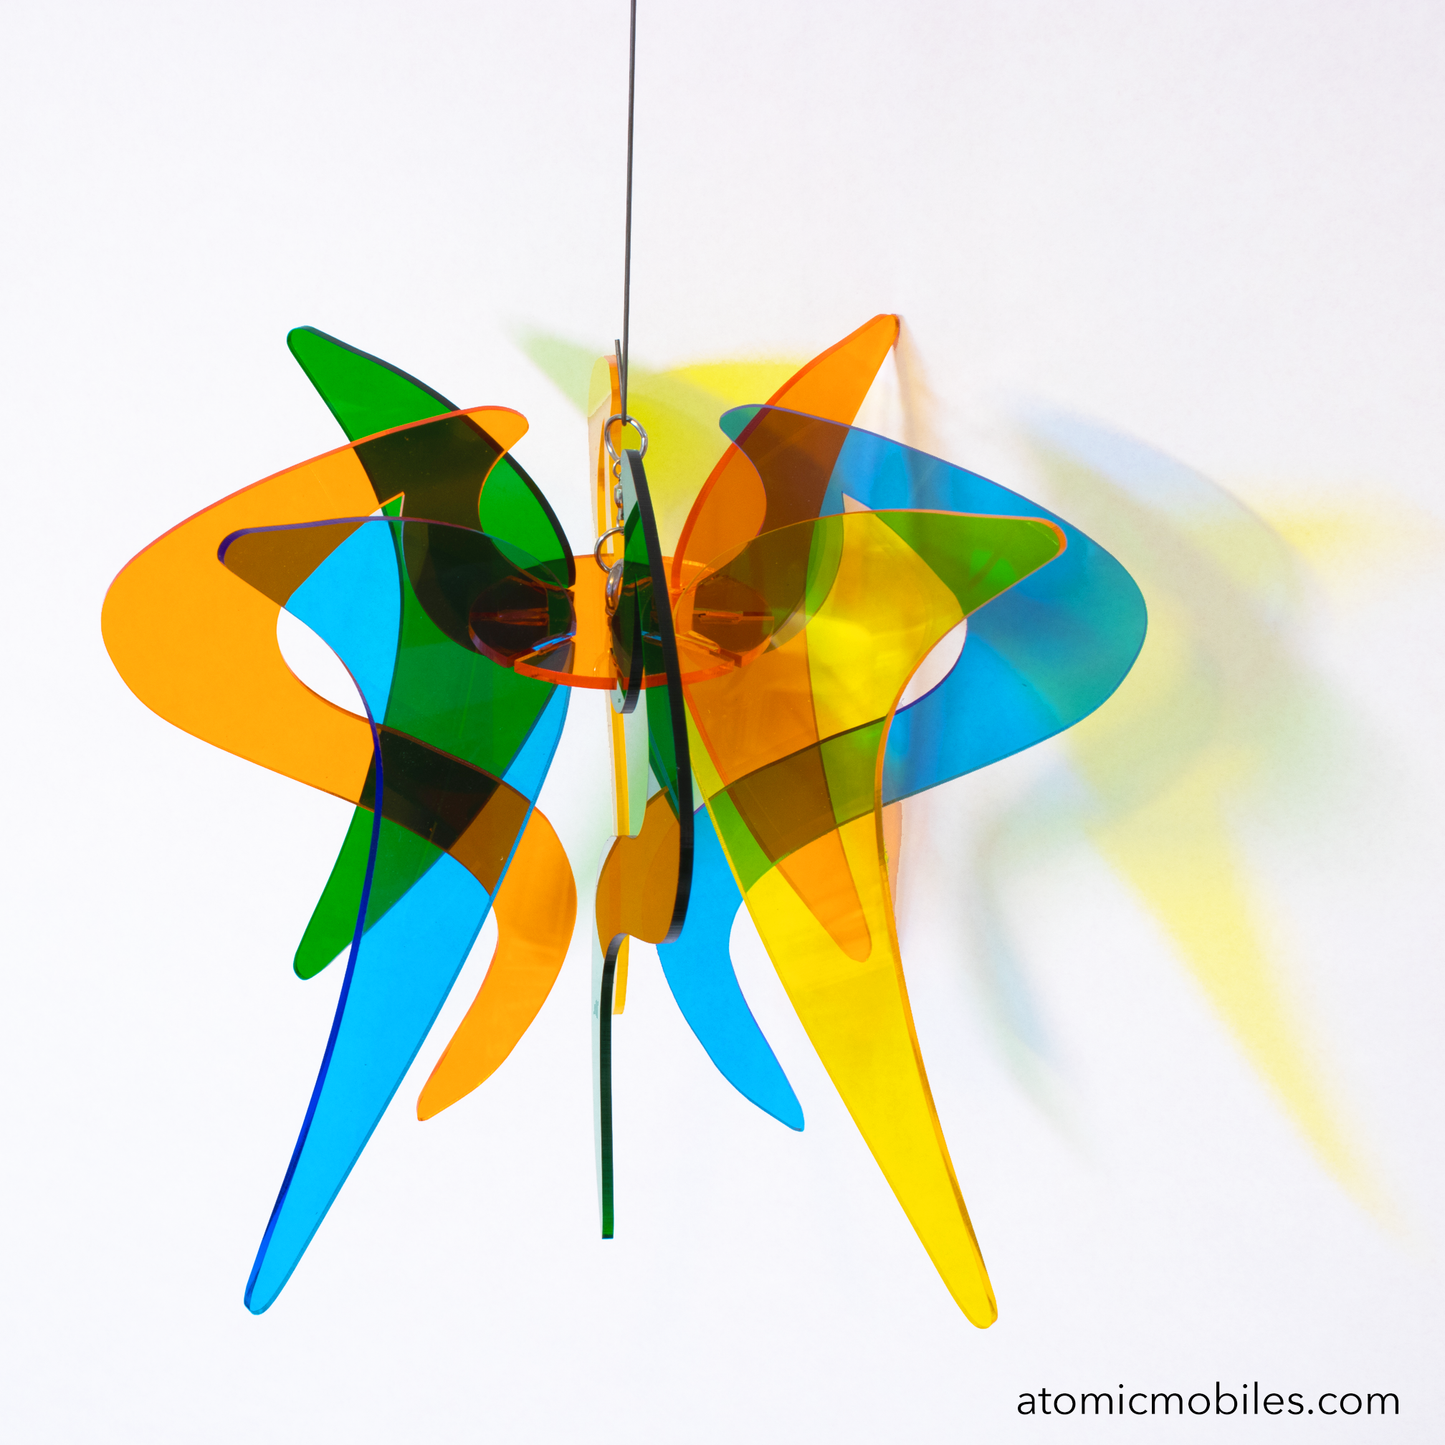 Genie Space Age RotaMobile kinetic hanging art mobile in clear Orange, Yellow, Blue, and Green acrylic plexiglass by AtomicMobiles.com